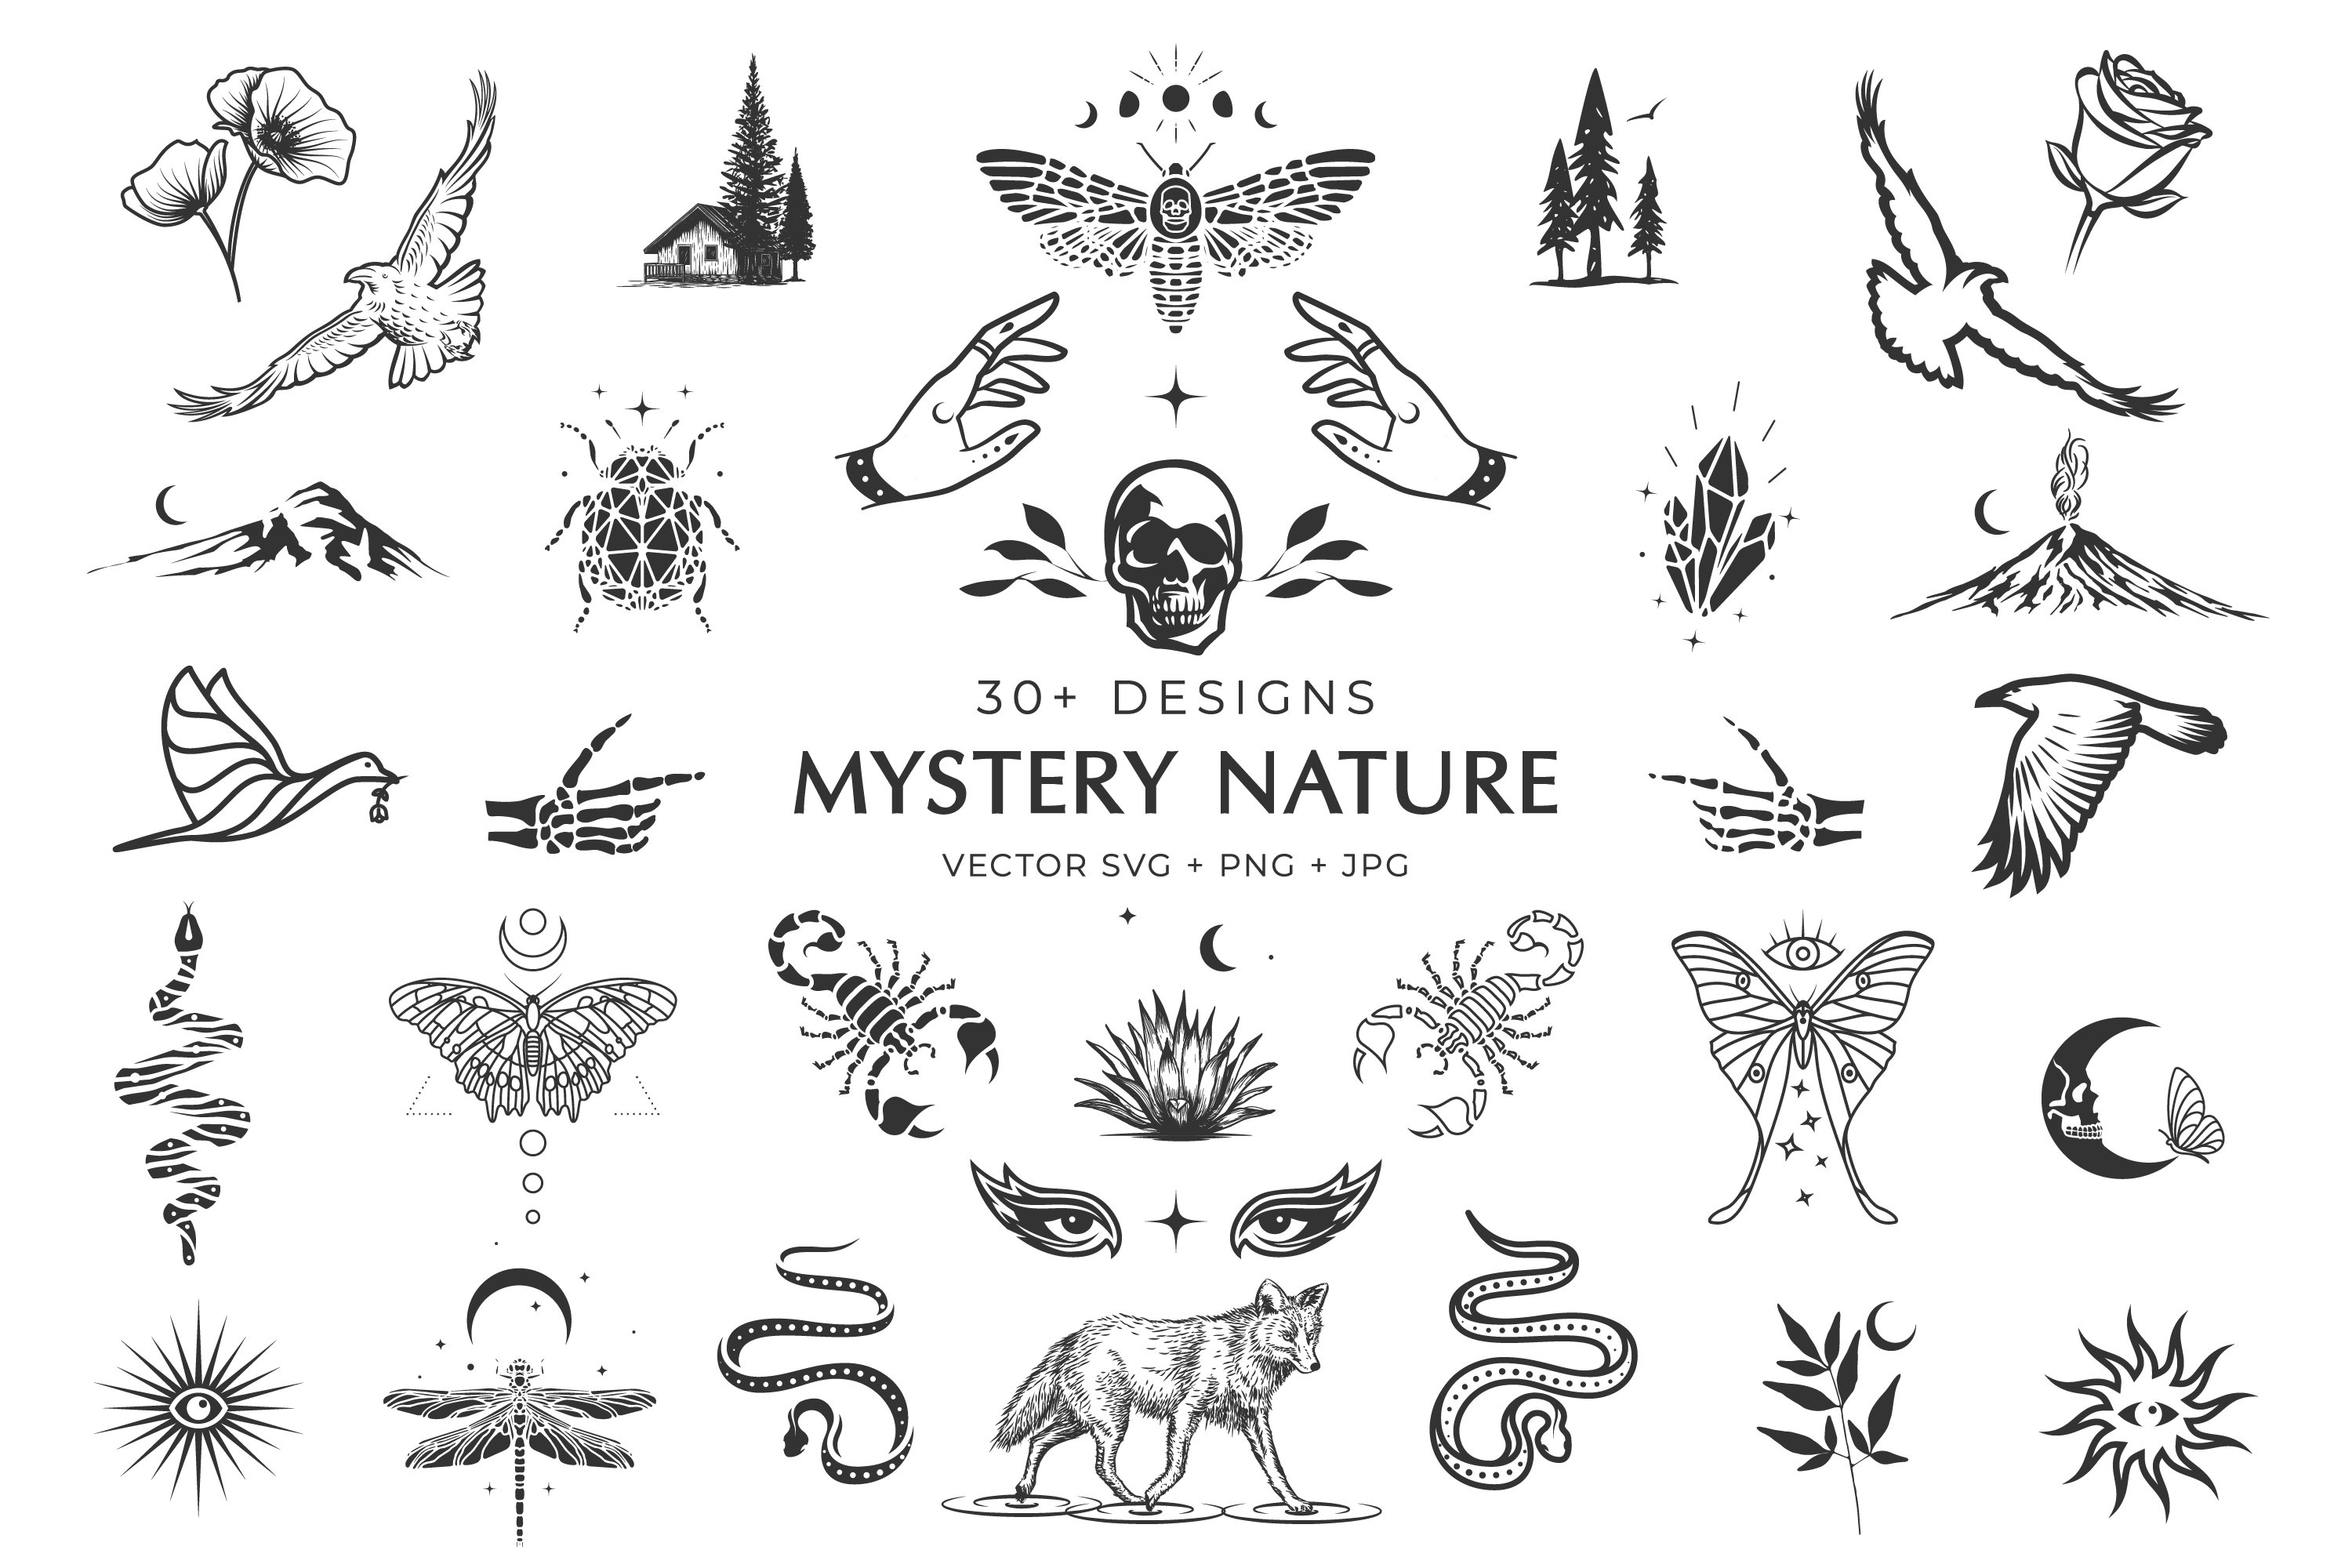 Mystery Nature vector clip art. preview image.